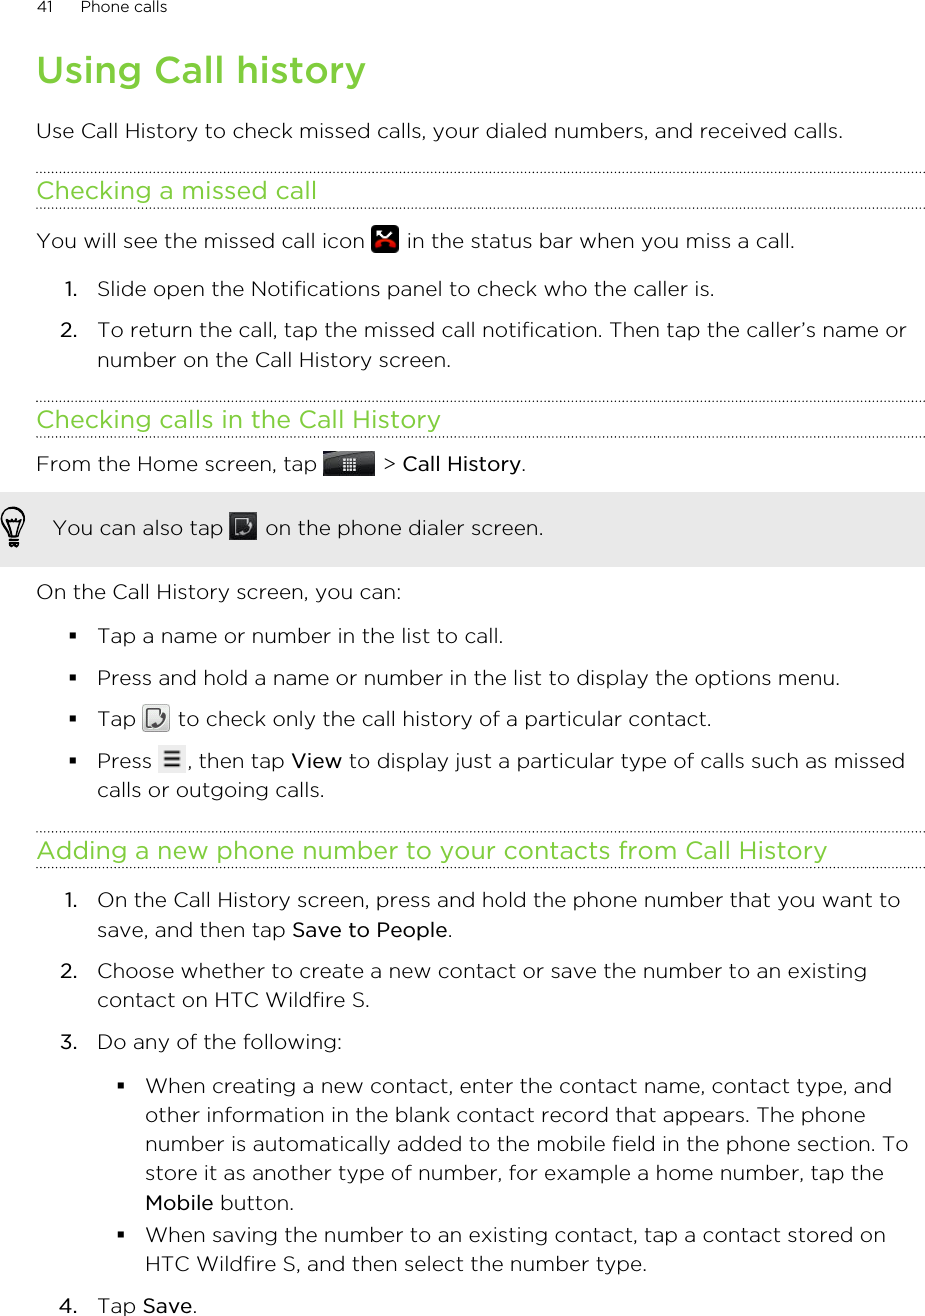 Using Call historyUse Call History to check missed calls, your dialed numbers, and received calls.Checking a missed callYou will see the missed call icon   in the status bar when you miss a call.1. Slide open the Notifications panel to check who the caller is.2. To return the call, tap the missed call notification. Then tap the caller’s name ornumber on the Call History screen.Checking calls in the Call HistoryFrom the Home screen, tap   &gt; Call History. You can also tap   on the phone dialer screen.On the Call History screen, you can:§Tap a name or number in the list to call.§Press and hold a name or number in the list to display the options menu.§Tap   to check only the call history of a particular contact.§Press  , then tap View to display just a particular type of calls such as missedcalls or outgoing calls.Adding a new phone number to your contacts from Call History1. On the Call History screen, press and hold the phone number that you want tosave, and then tap Save to People.2. Choose whether to create a new contact or save the number to an existingcontact on HTC Wildfire S.3. Do any of the following:§When creating a new contact, enter the contact name, contact type, andother information in the blank contact record that appears. The phonenumber is automatically added to the mobile field in the phone section. Tostore it as another type of number, for example a home number, tap theMobile button.§When saving the number to an existing contact, tap a contact stored onHTC Wildfire S, and then select the number type.4. Tap Save.41 Phone calls